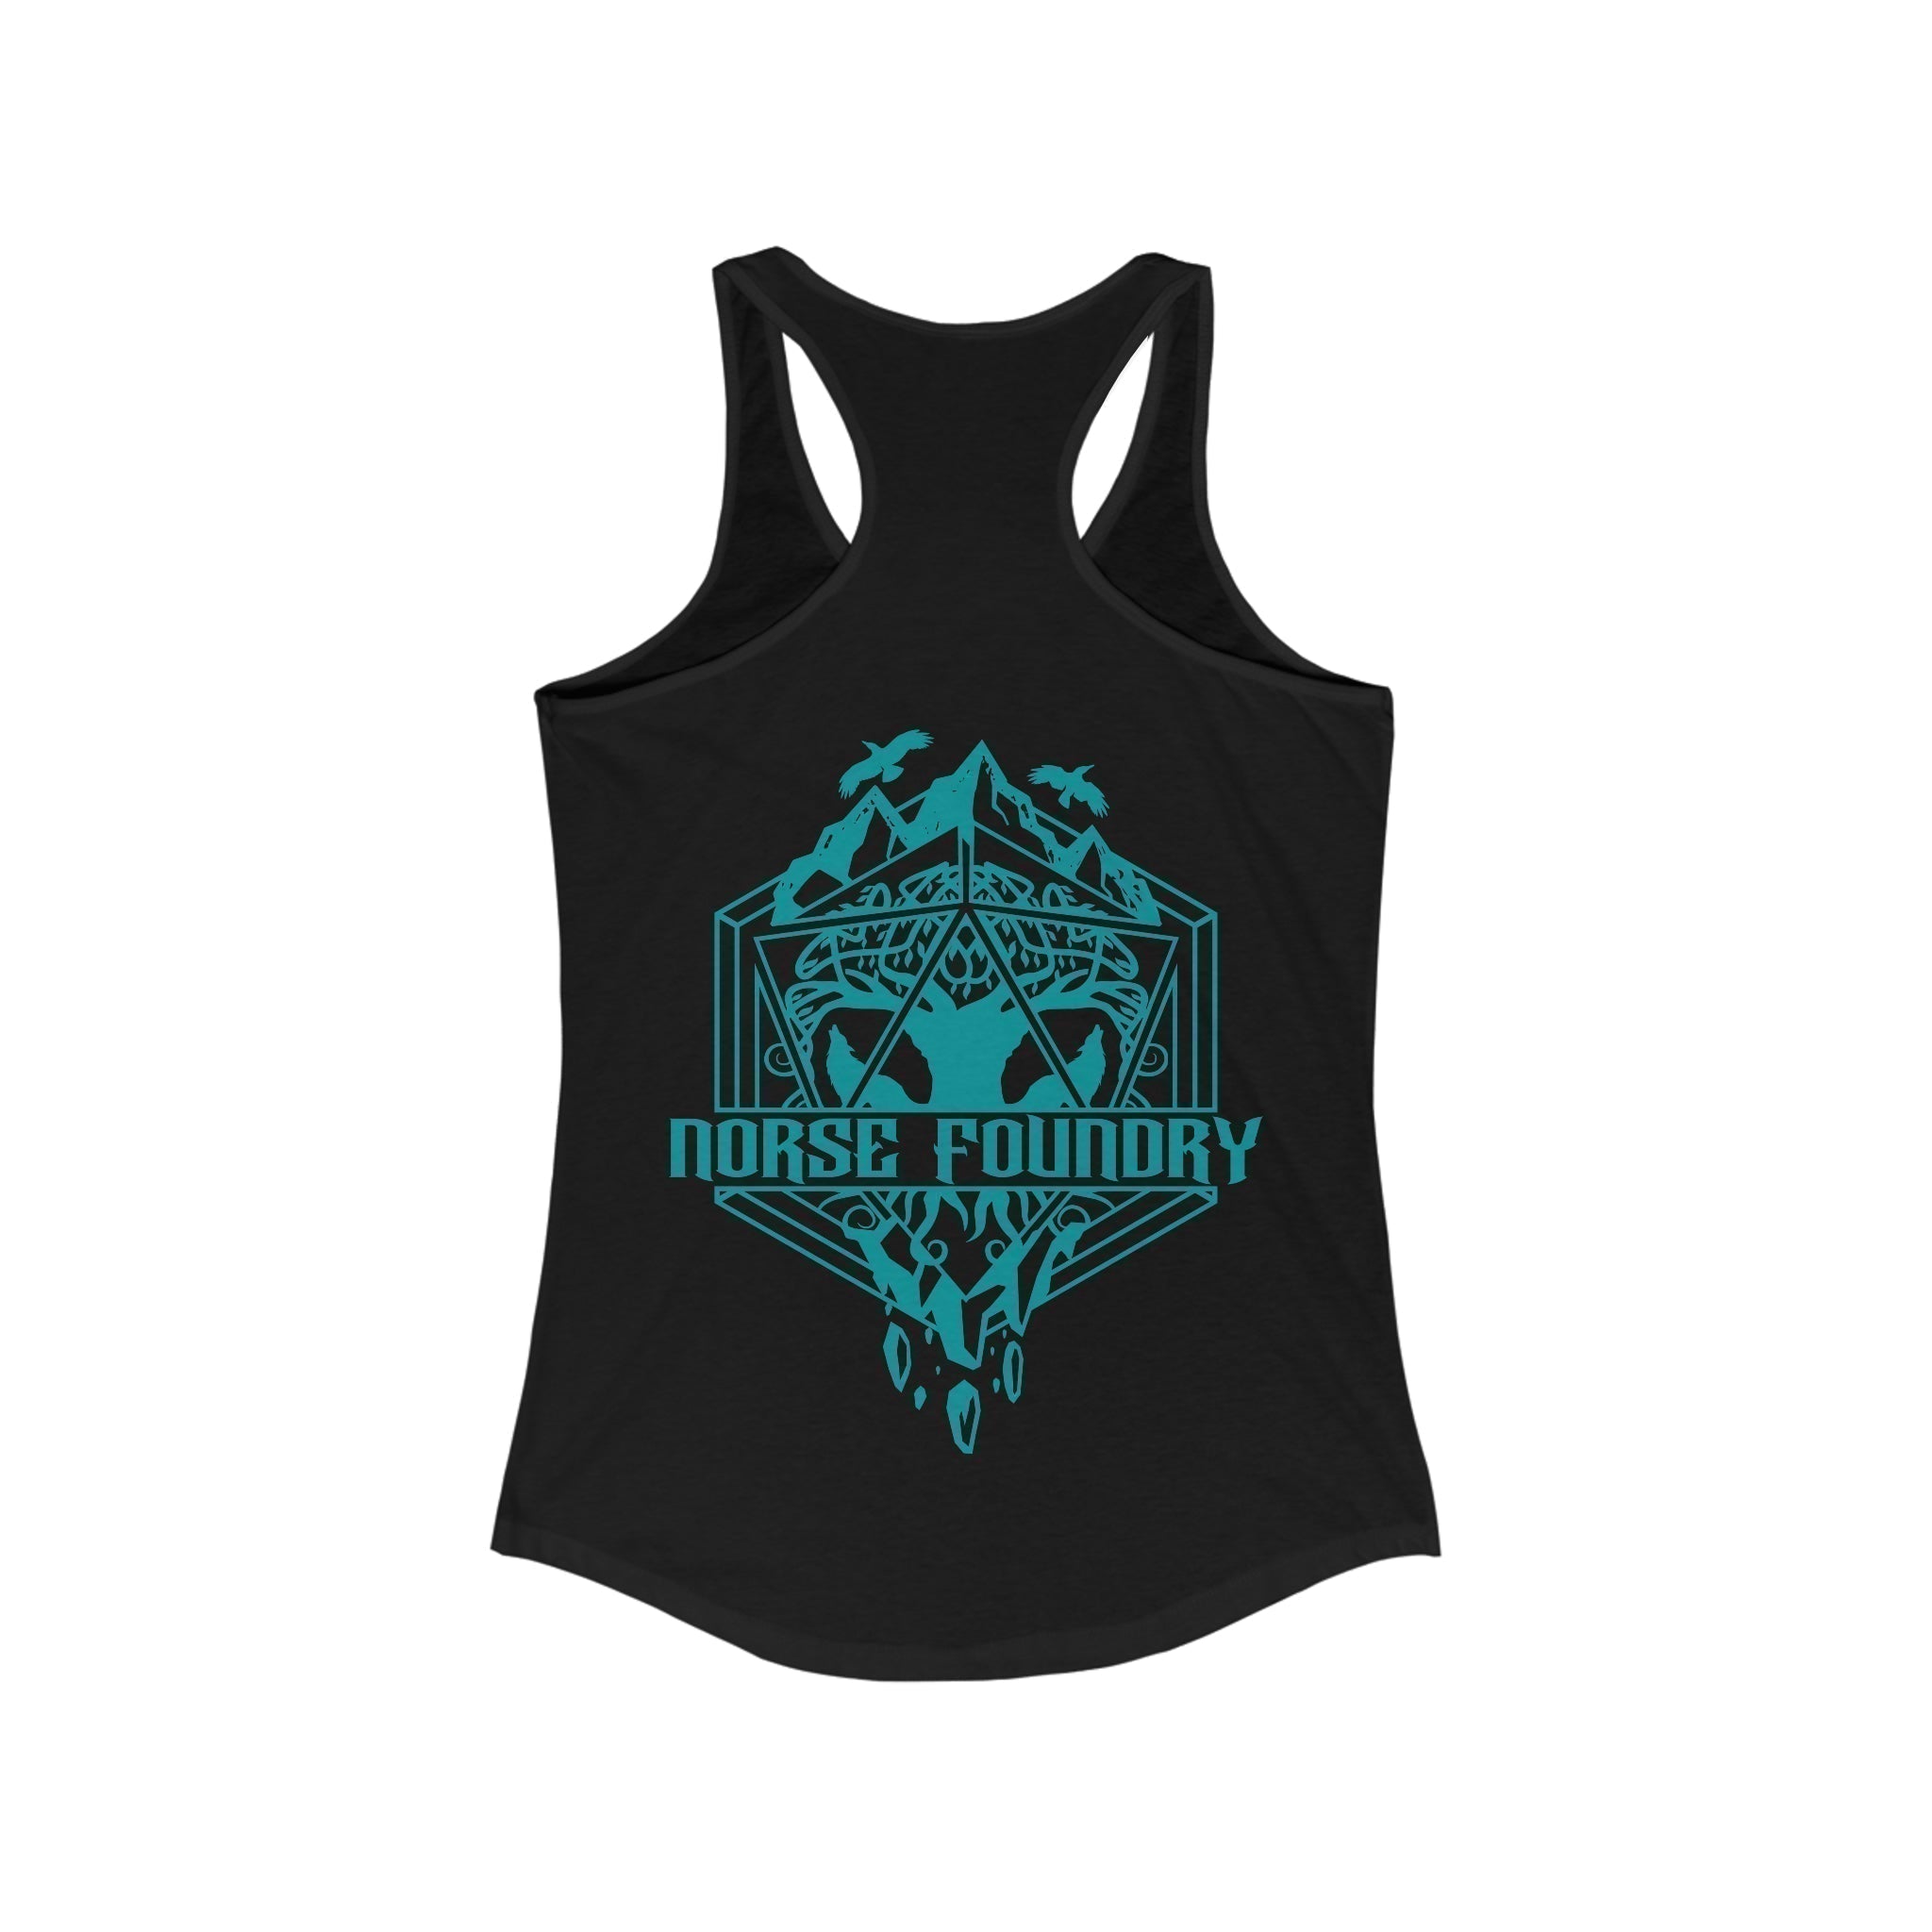 Roll for Adventure - Norse Foundry Women's Tank Top - 60472219455809120343